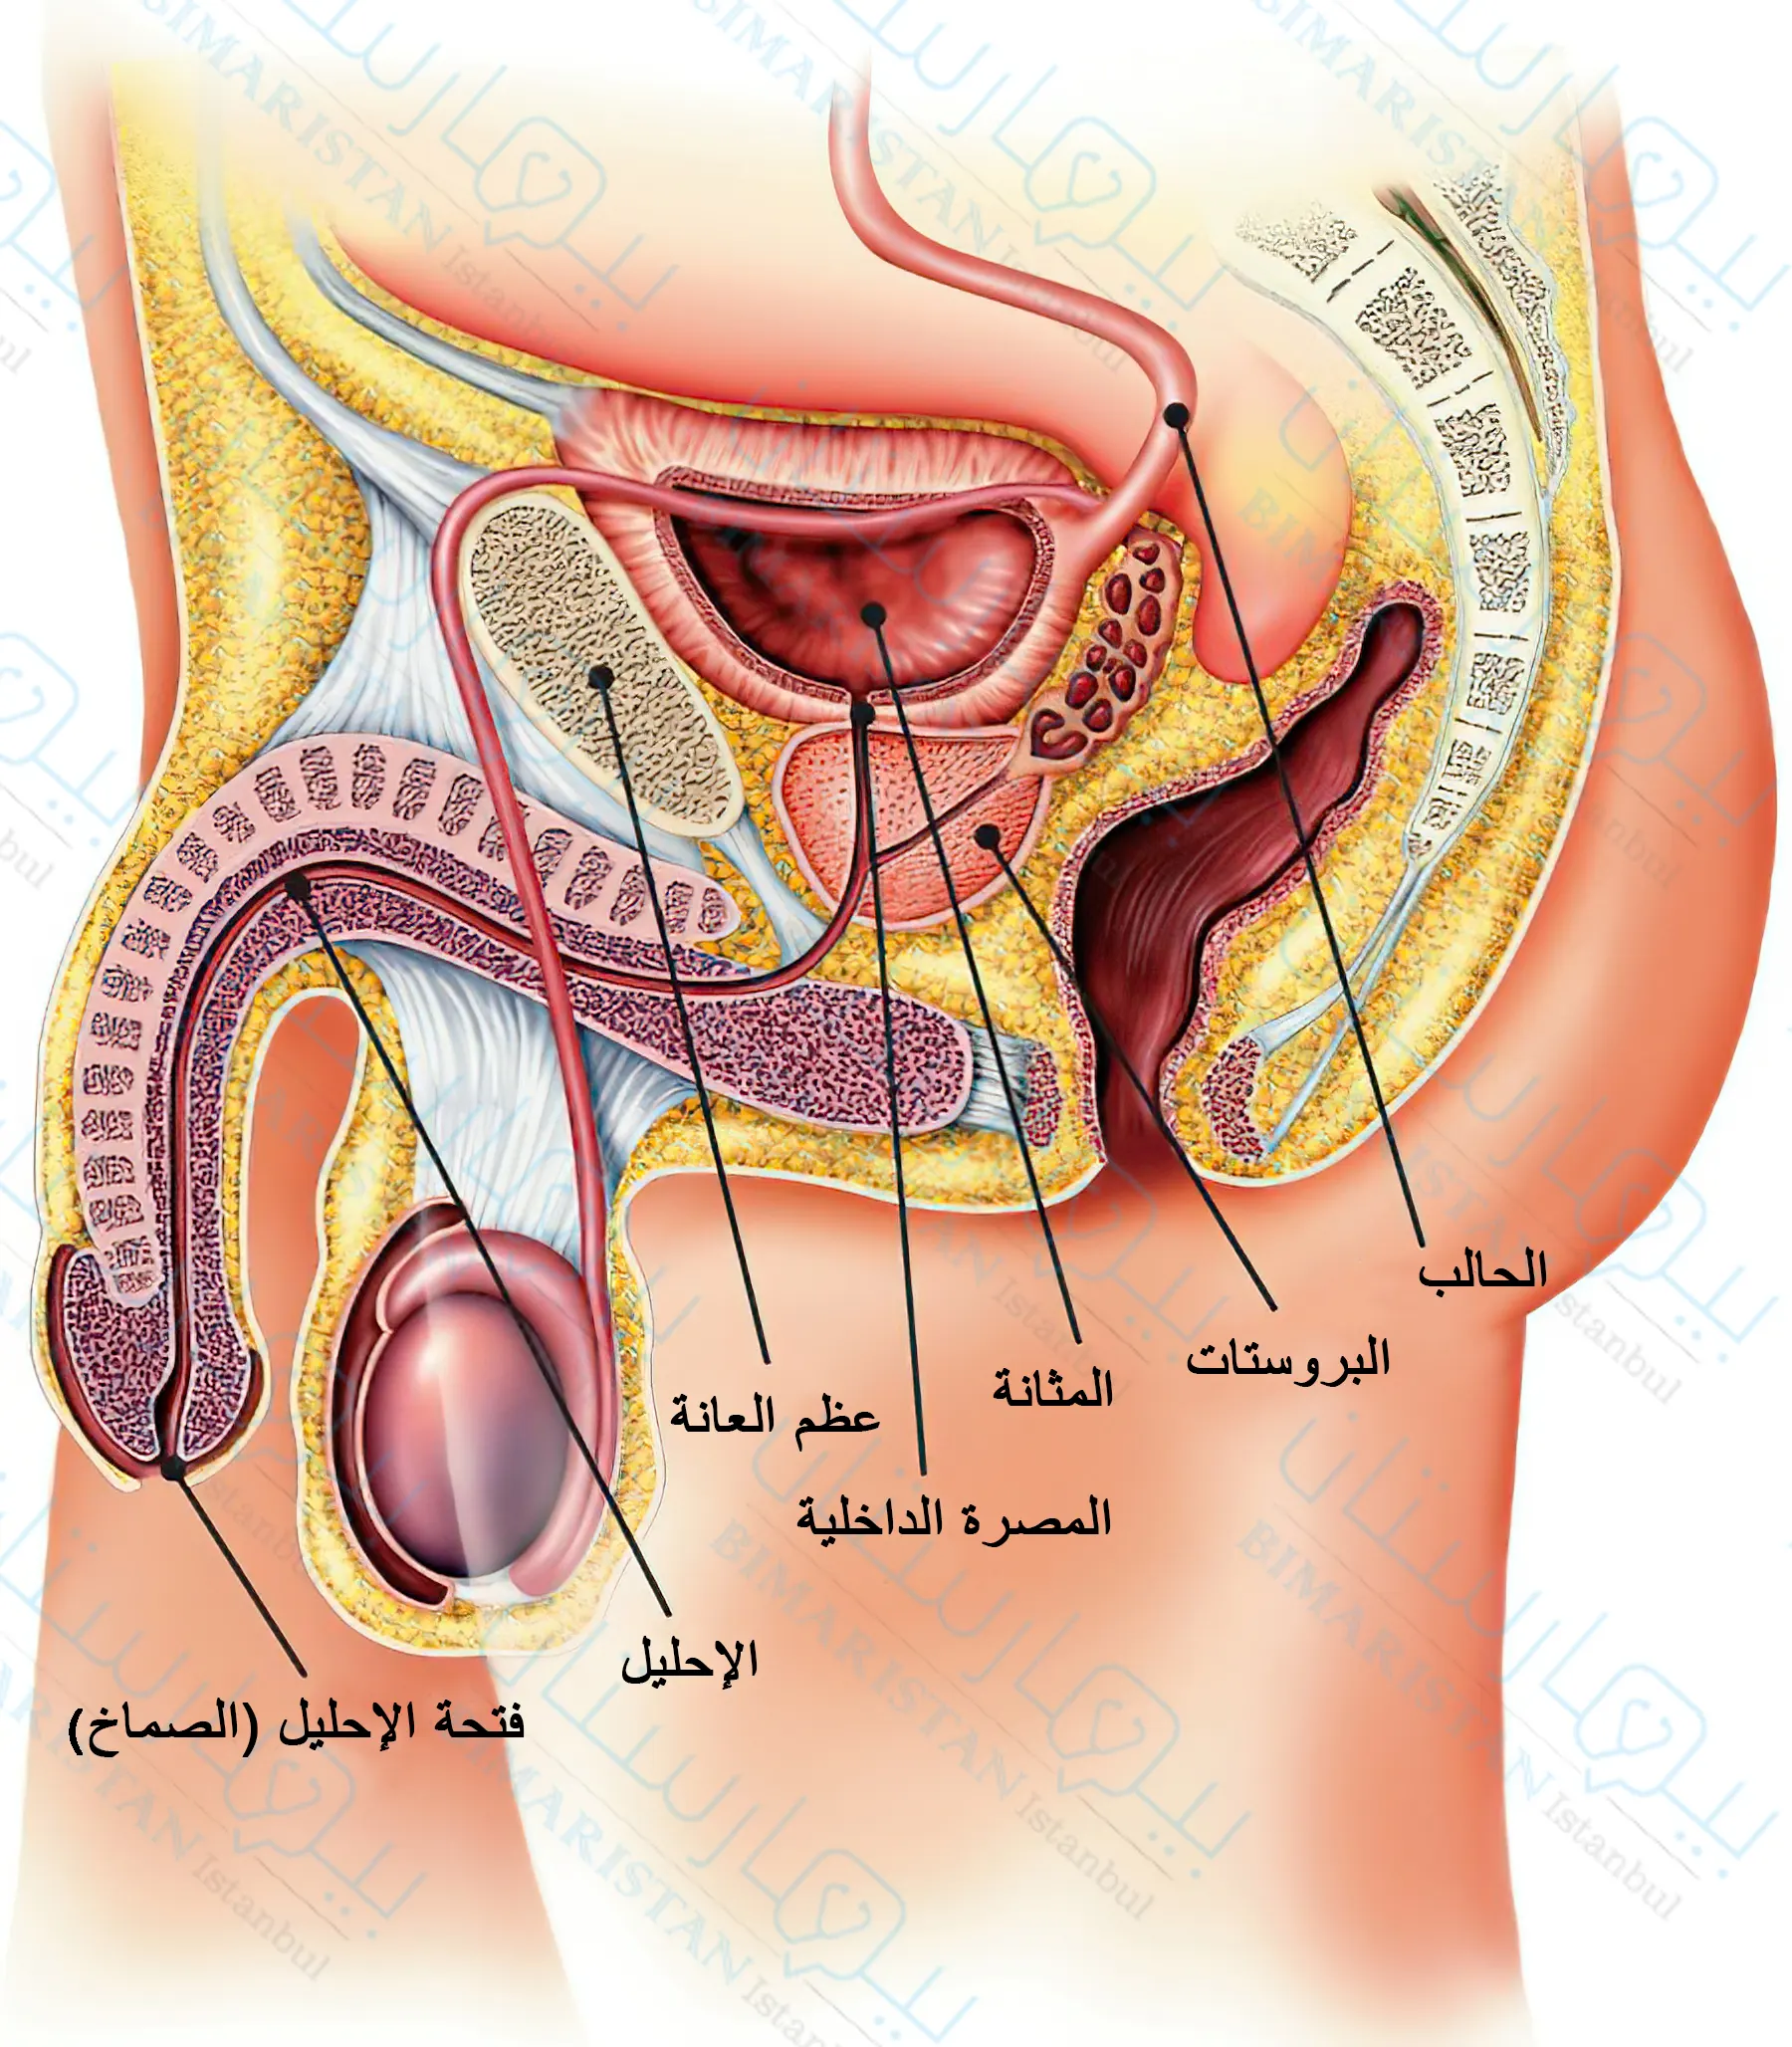 The urinary system in males consists of the kidneys, ureters, bladder, and urethra